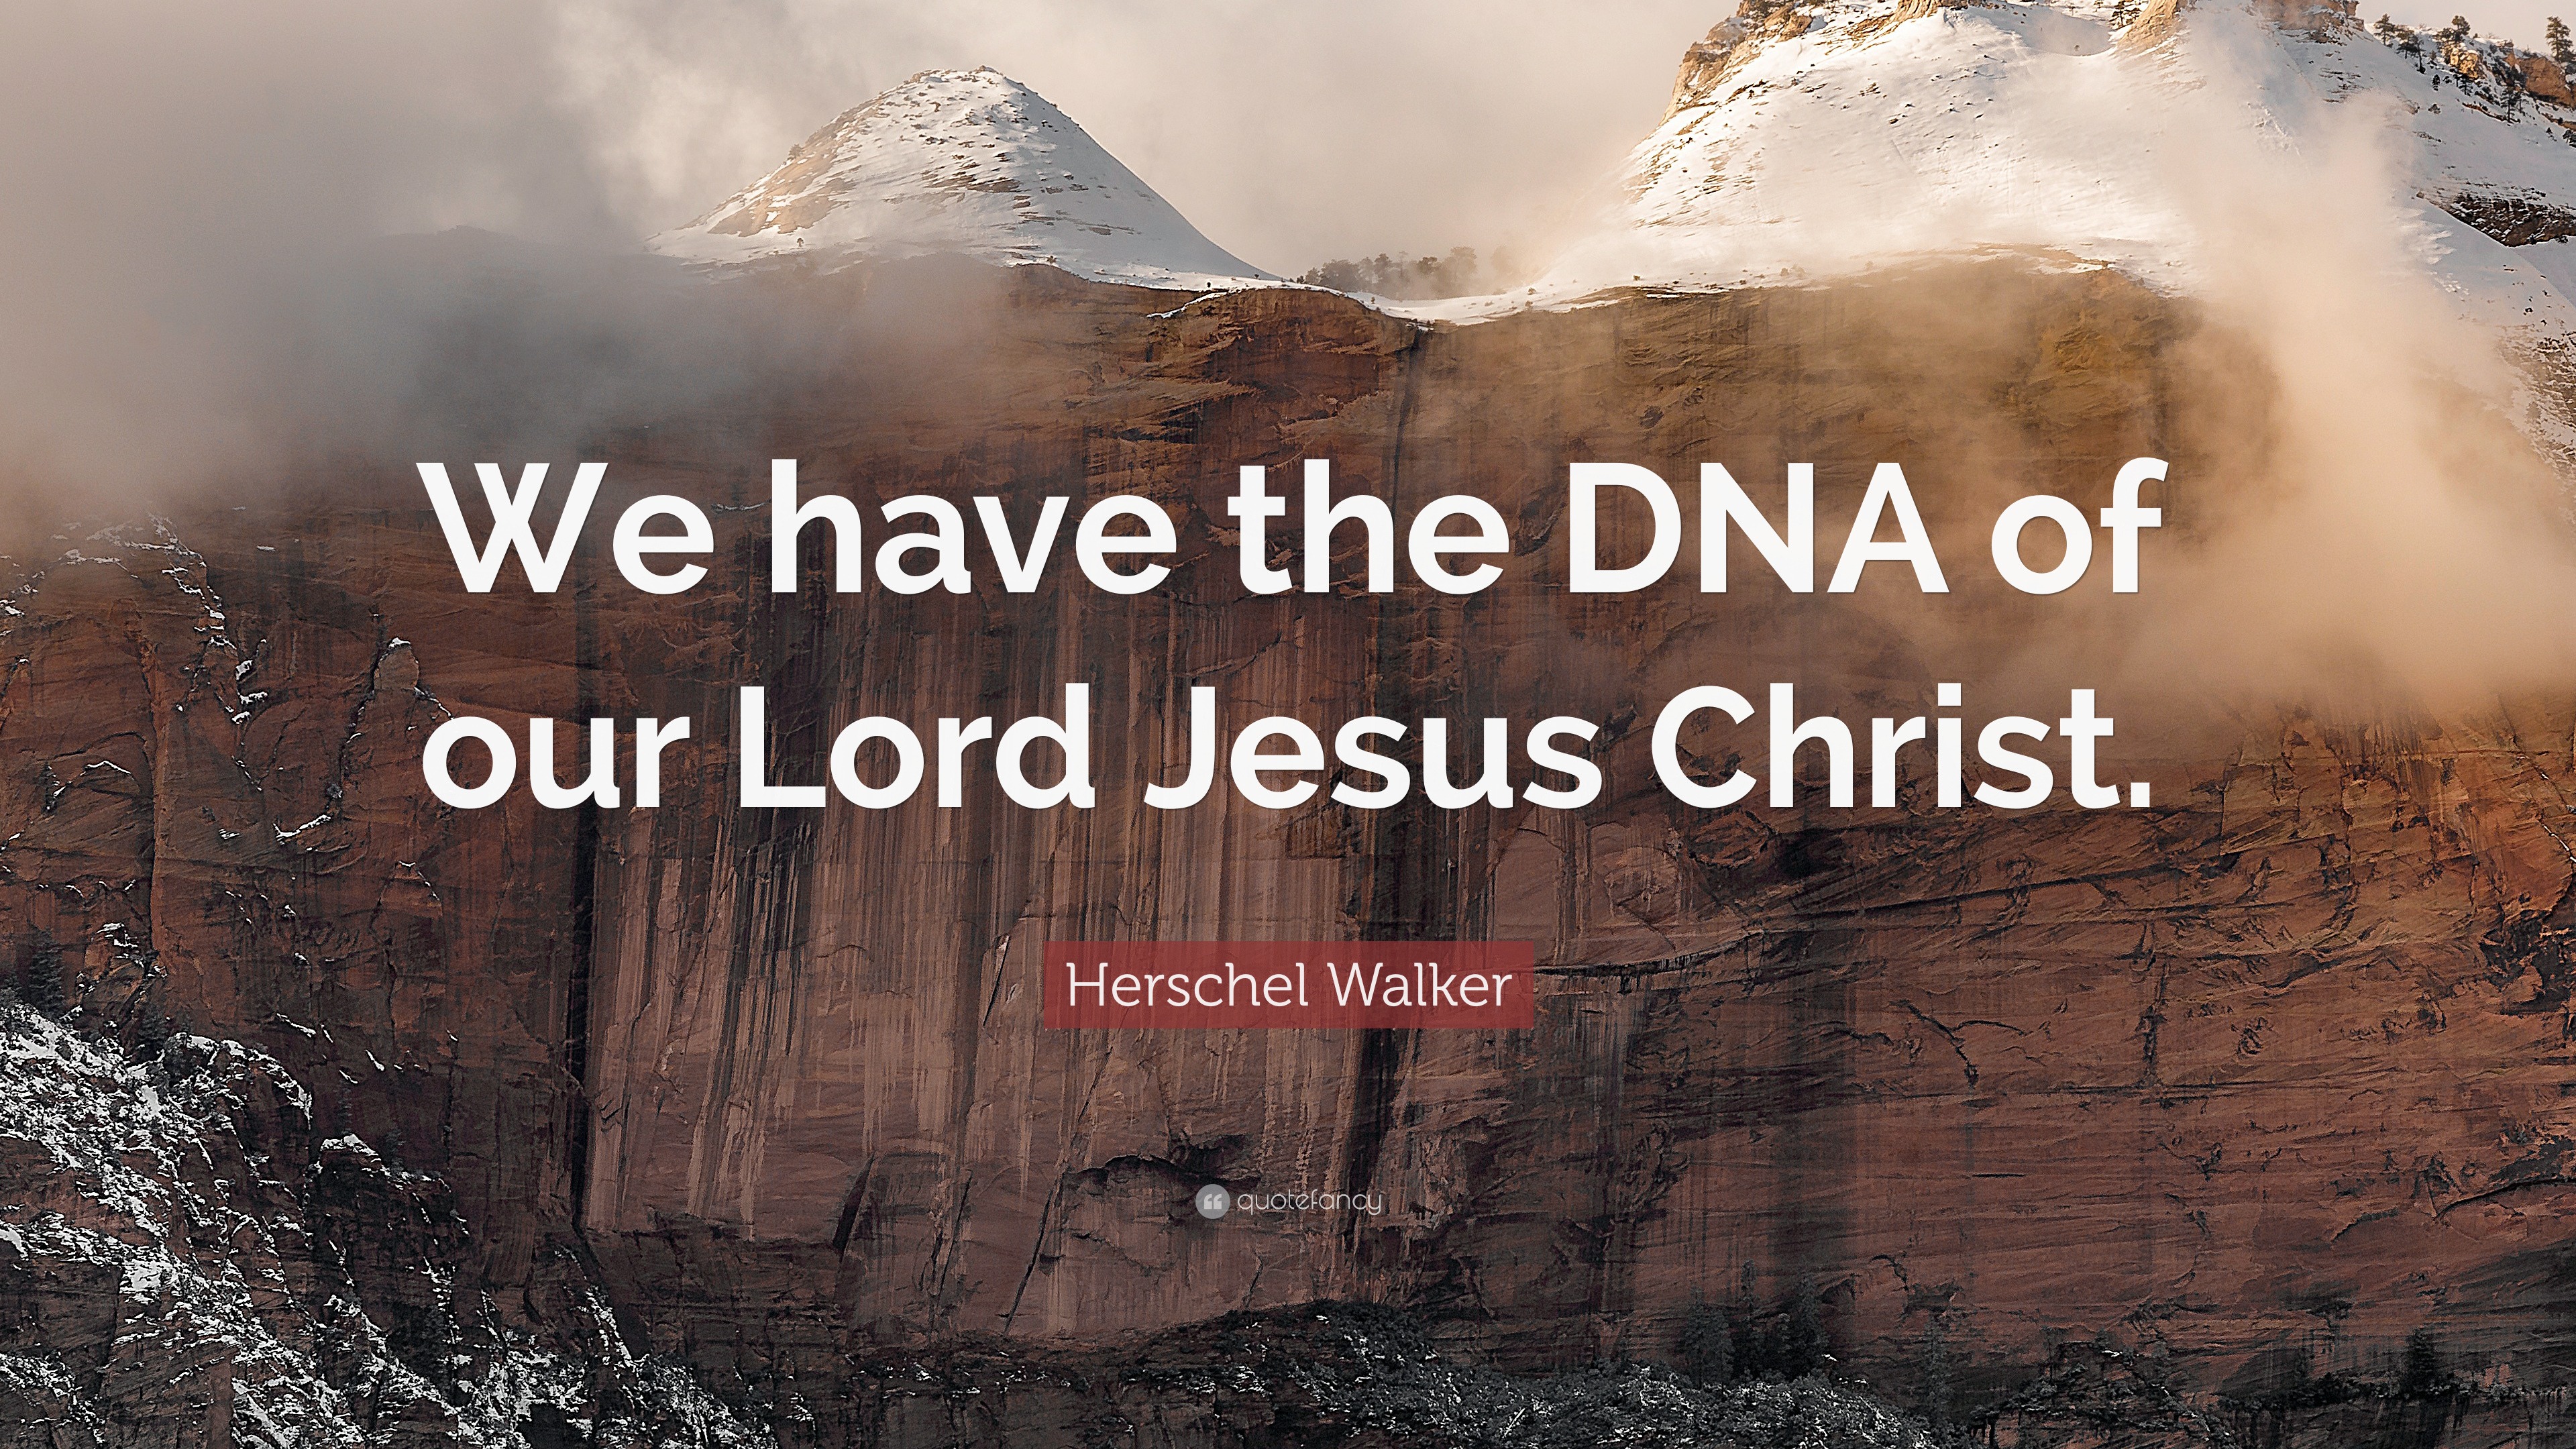 Herschel Walker Quote: “We have the DNA of our Lord Jesus Christ.”